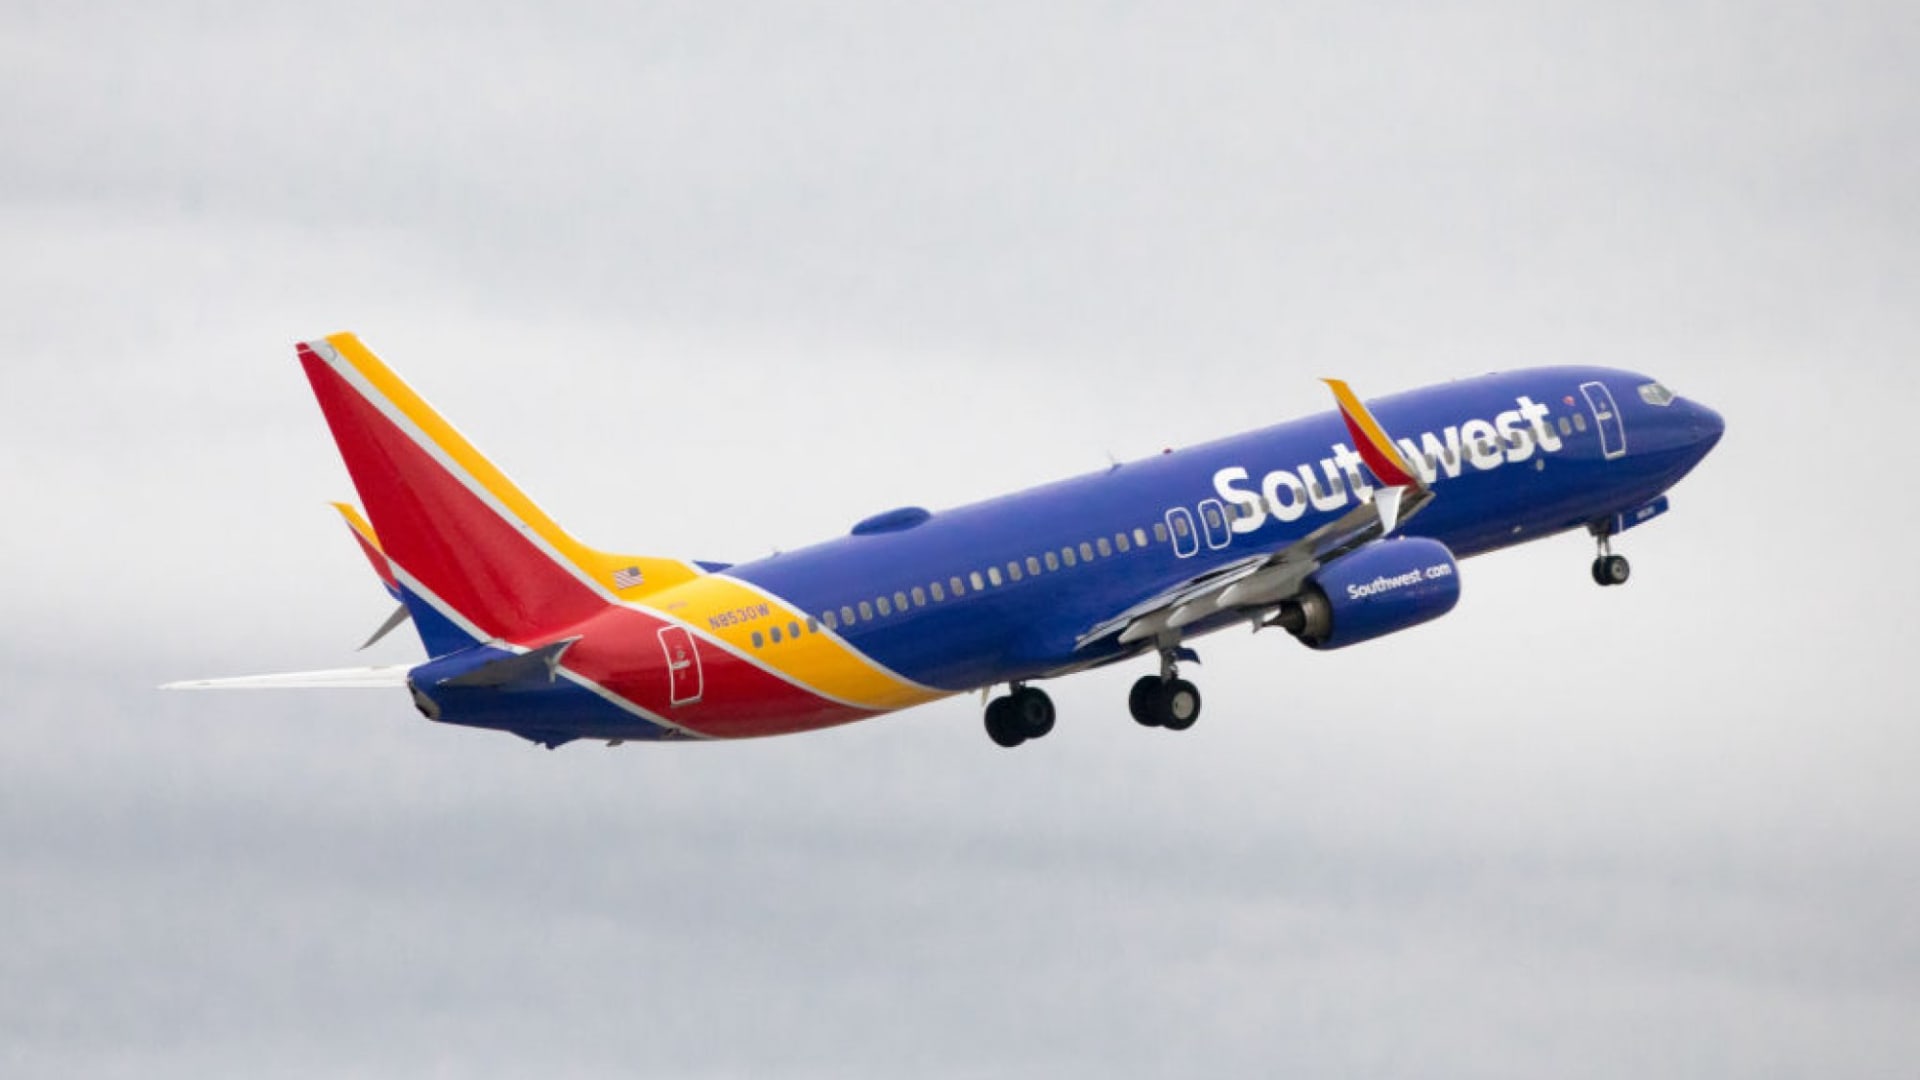 After 49 Long Years, Southwest Airlines Just Made a Striking Announcement